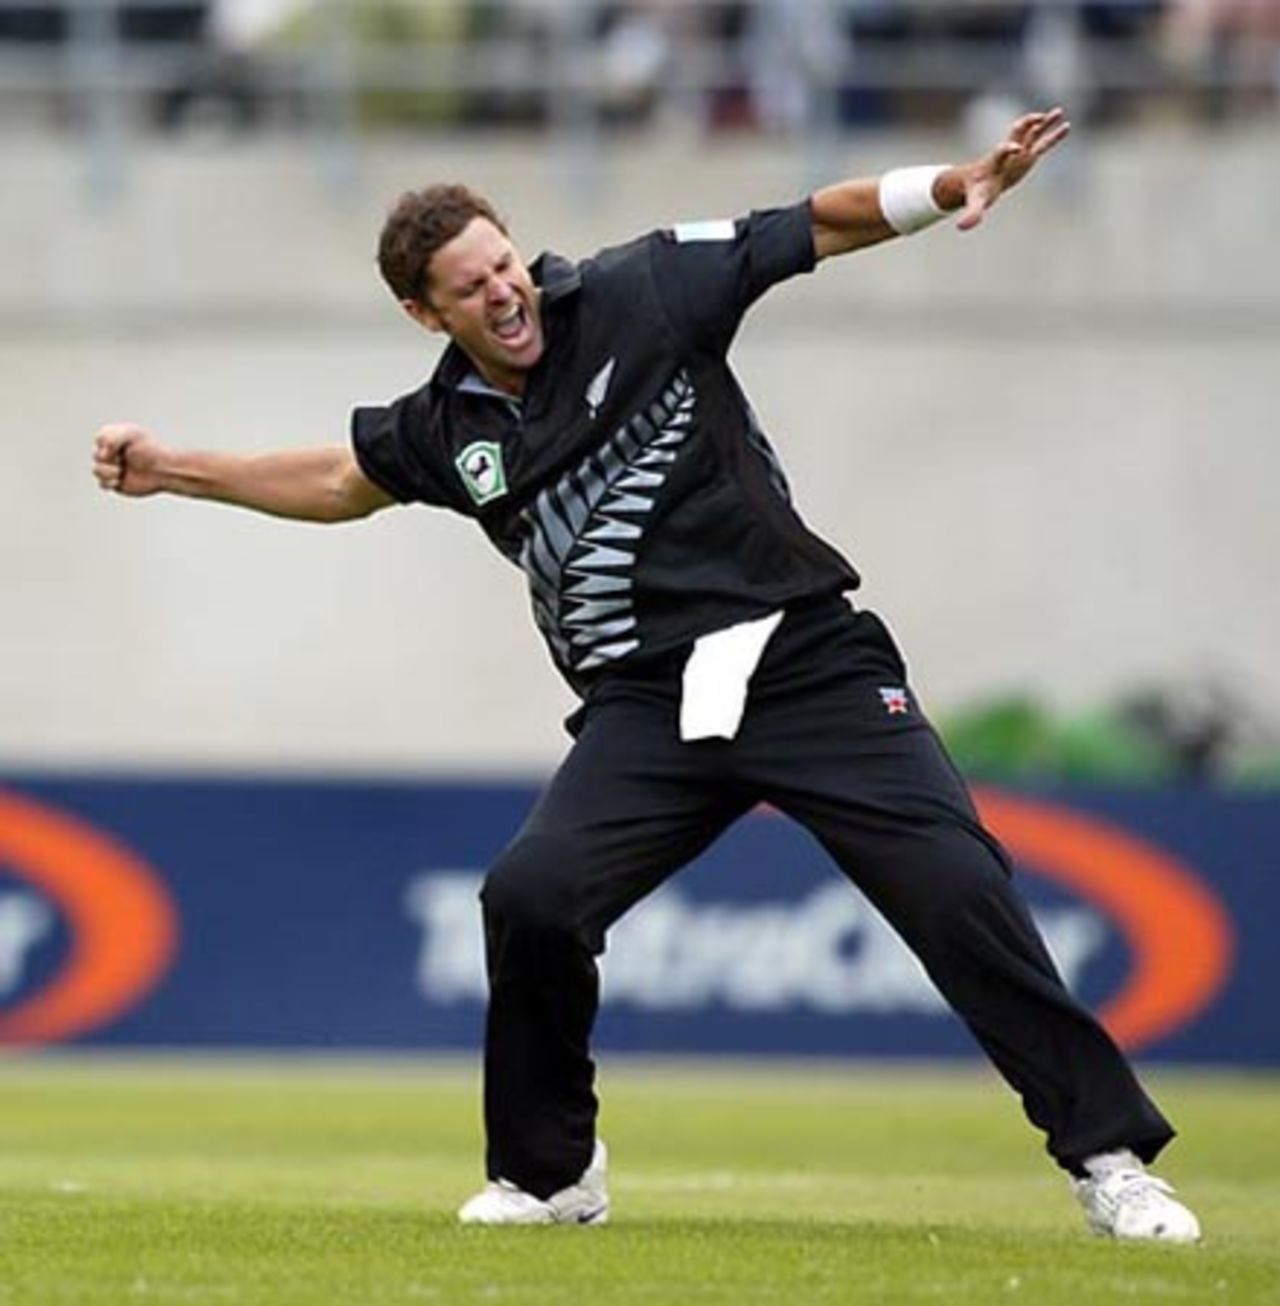 New Zealand bowler Chris Cairns celebrates the dismissal of England batsman Ashley Giles, caught by Chris Harris for two. 1st ODI: New Zealand v England at Jade Stadium, Christchurch, 13 February 2002.